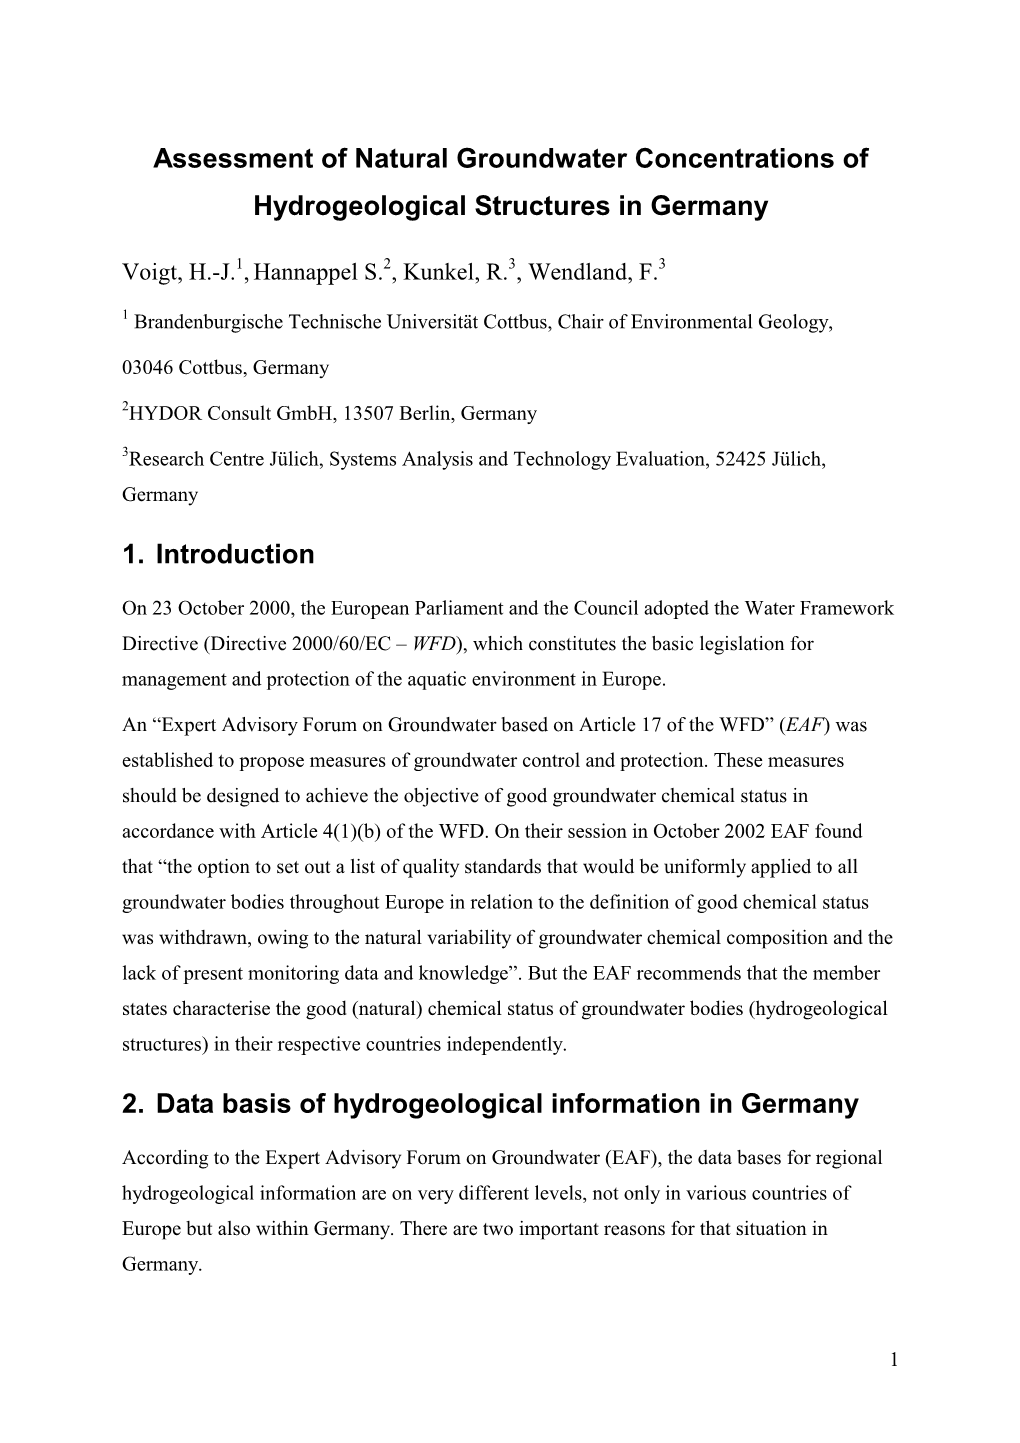 Assessment of Natural Groundwater Concentrations of Hydrogeological Structures in Germany